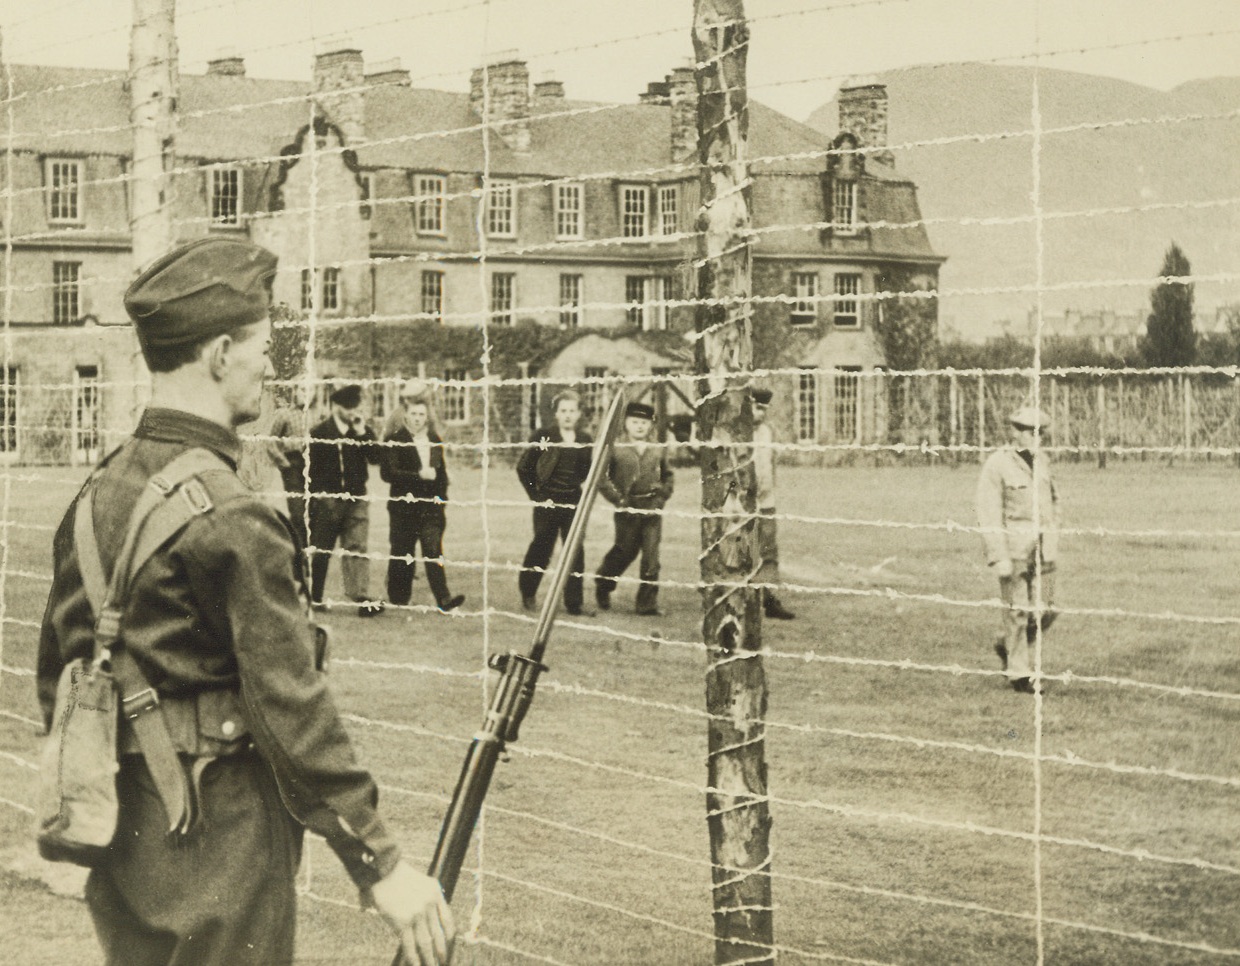 German Prisoners of War in a British Internment Camp, 11/9/1939. Somewhere in England – This picture is one of the first to be made of German prisoners of war, captured and interned for the duration at a large country mansion. The prisoners, among them U-Boat crews, are pictured exercising on the fenced and well-guarded grounds of the mansion. Freedom for exercise, good food and liberty to listen to British Broadcasting Company News and programs is given them to make their confinement as easy as possible. Passed by Censor Credit: ACME;